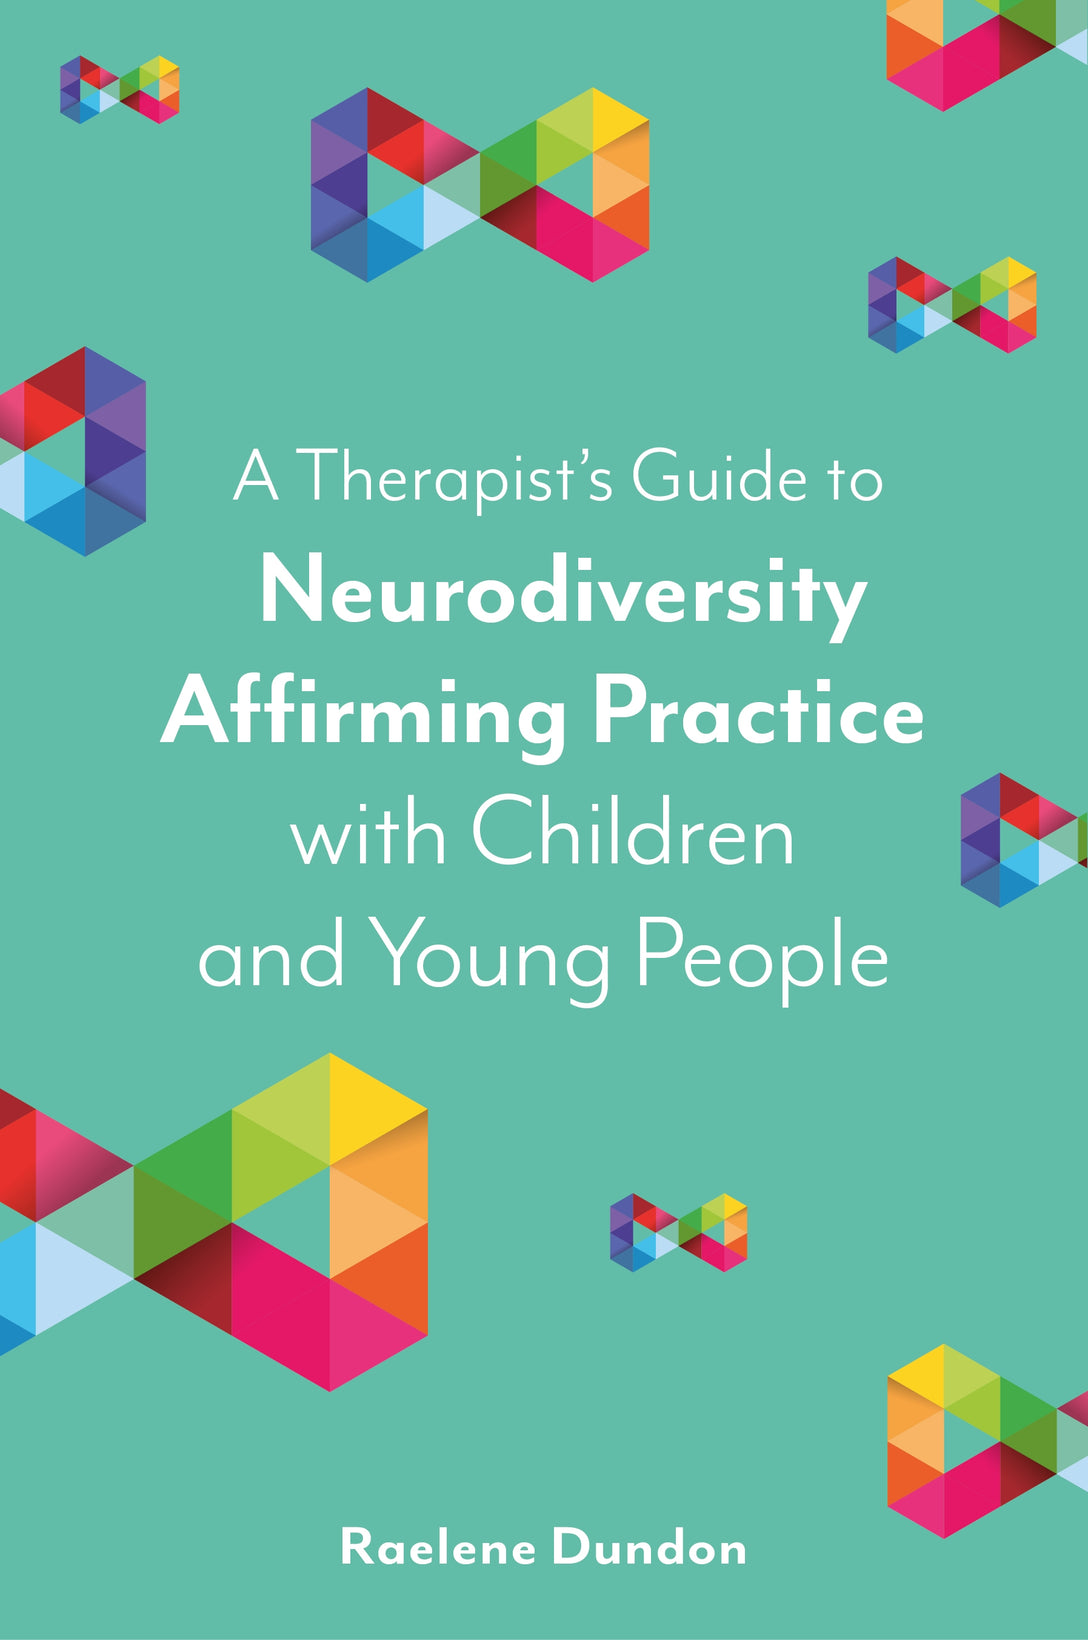 A Therapist’s Guide to Neurodiversity Affirming Practice with Children and Young People by Raelene Dundon